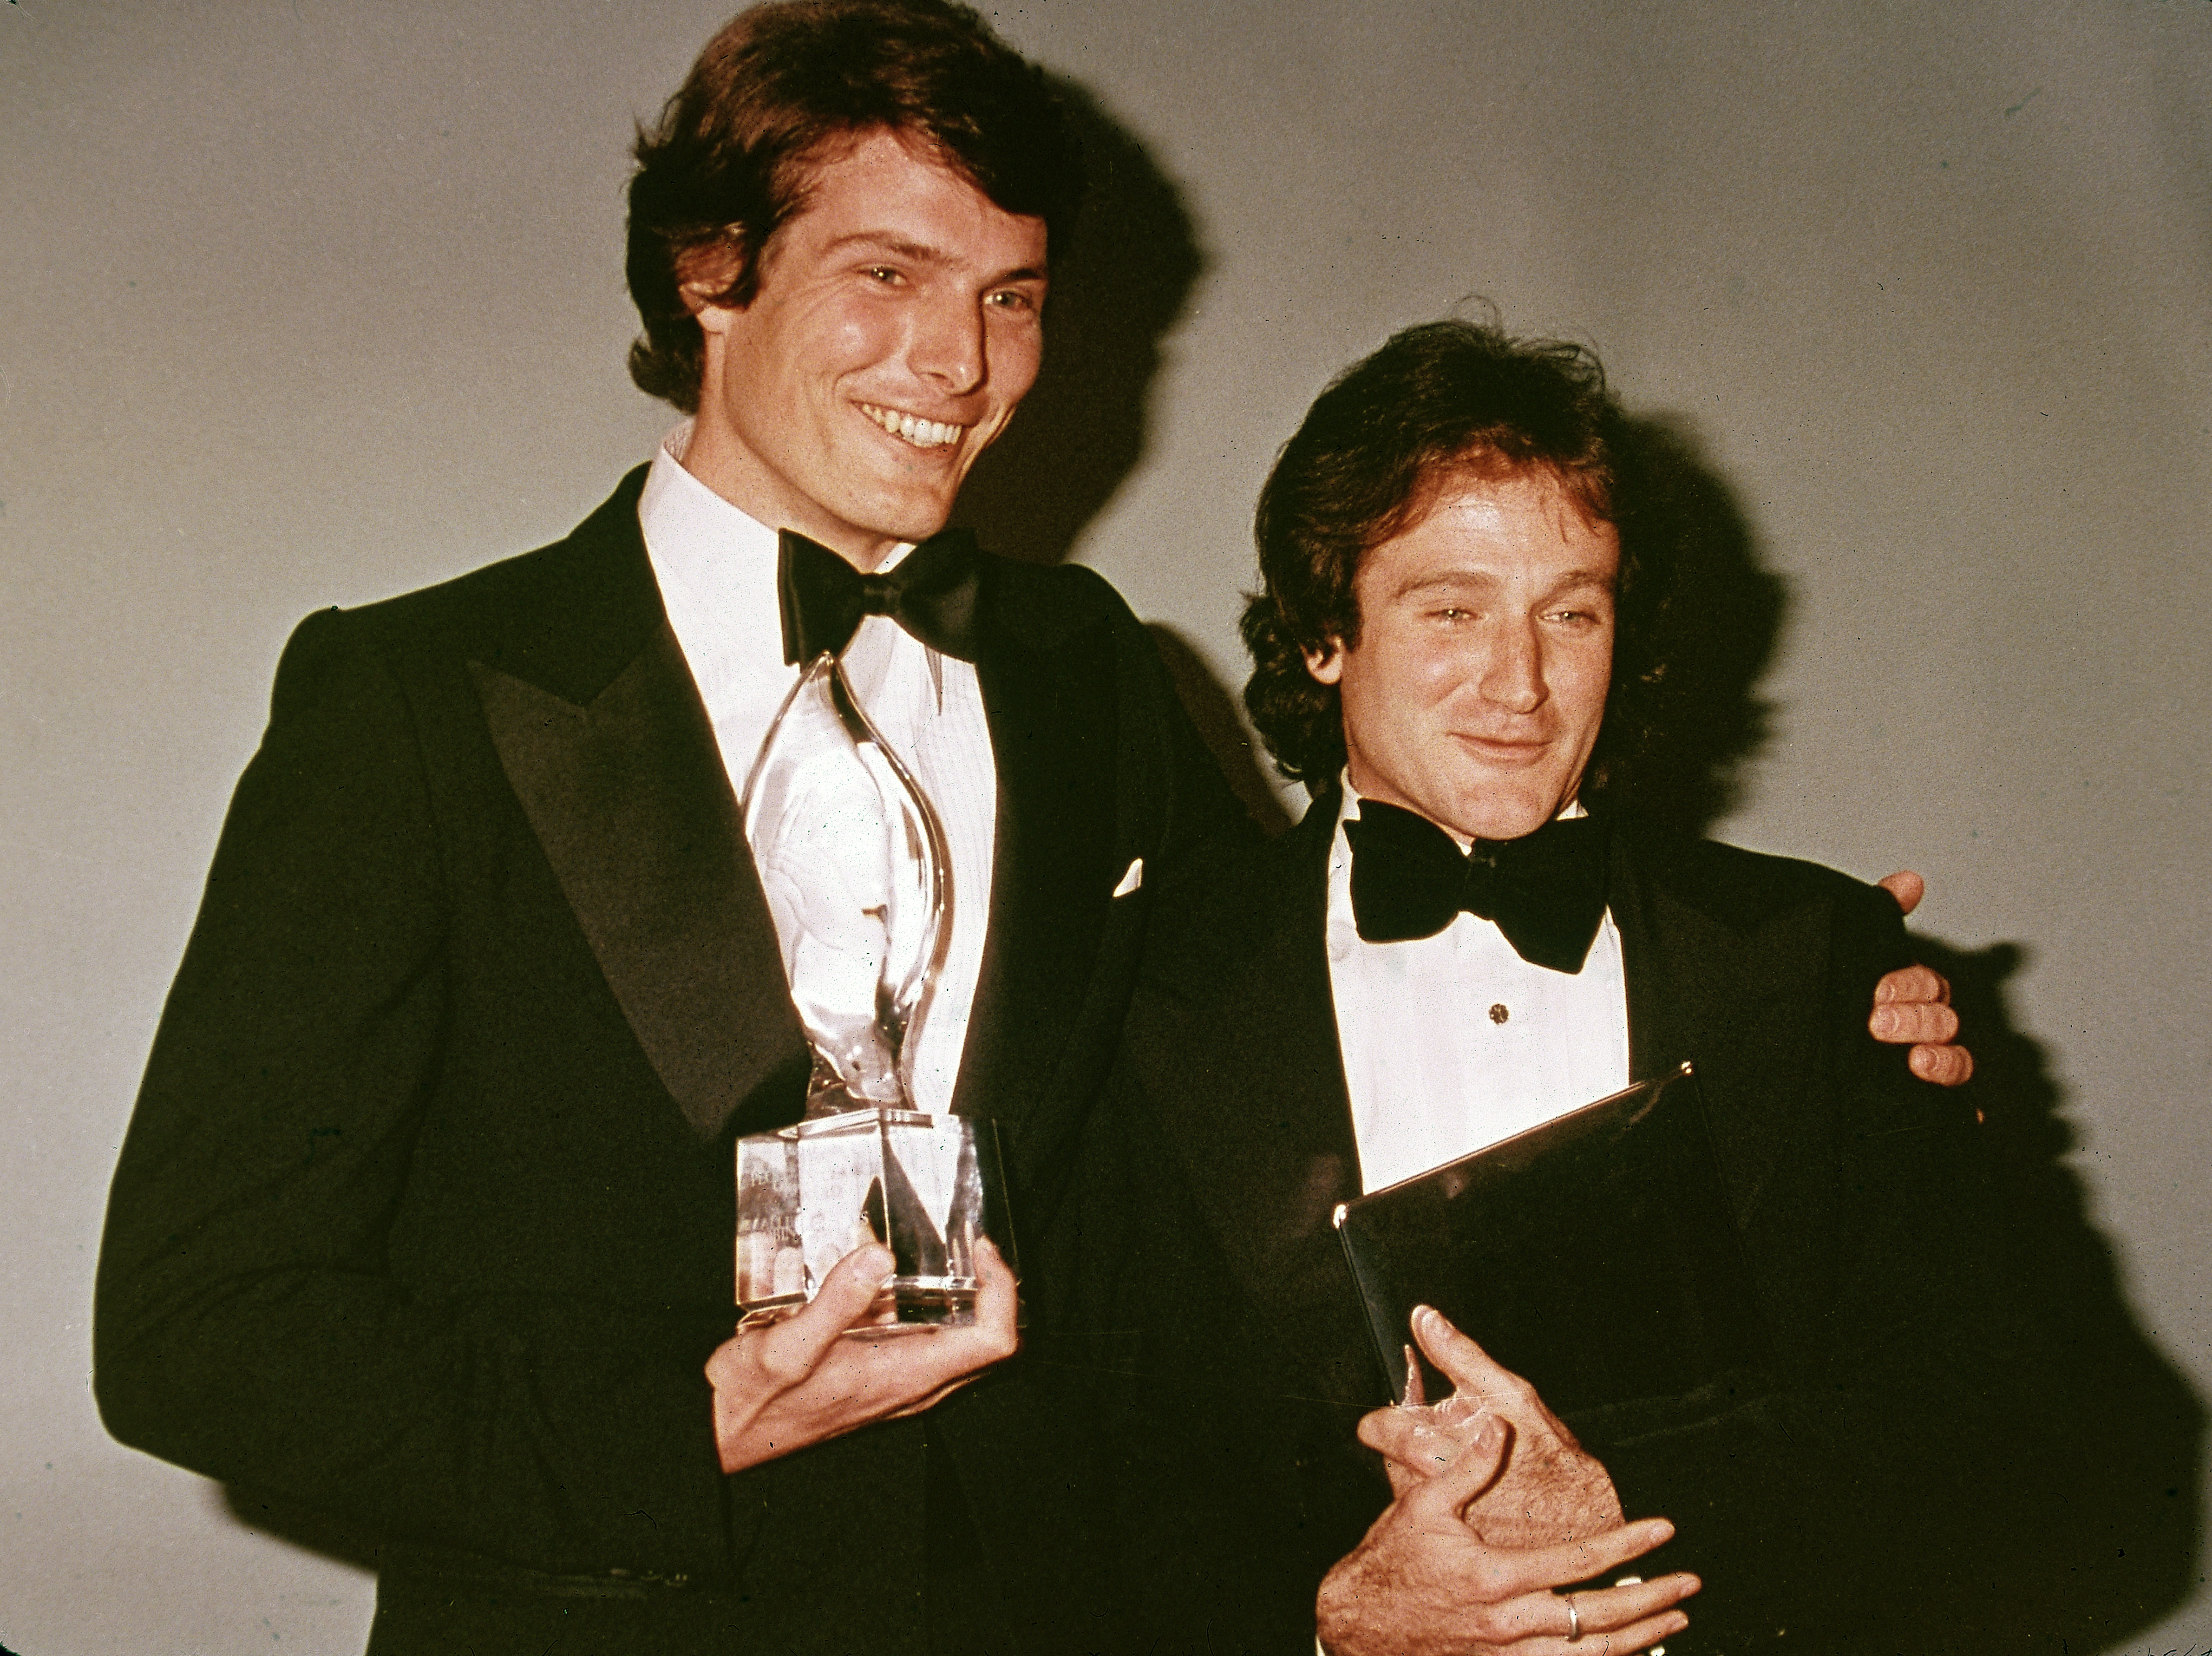 Christopher Reeve and Robin Williams at the People's Choice Awards in March 1979. | Source: Getty Images